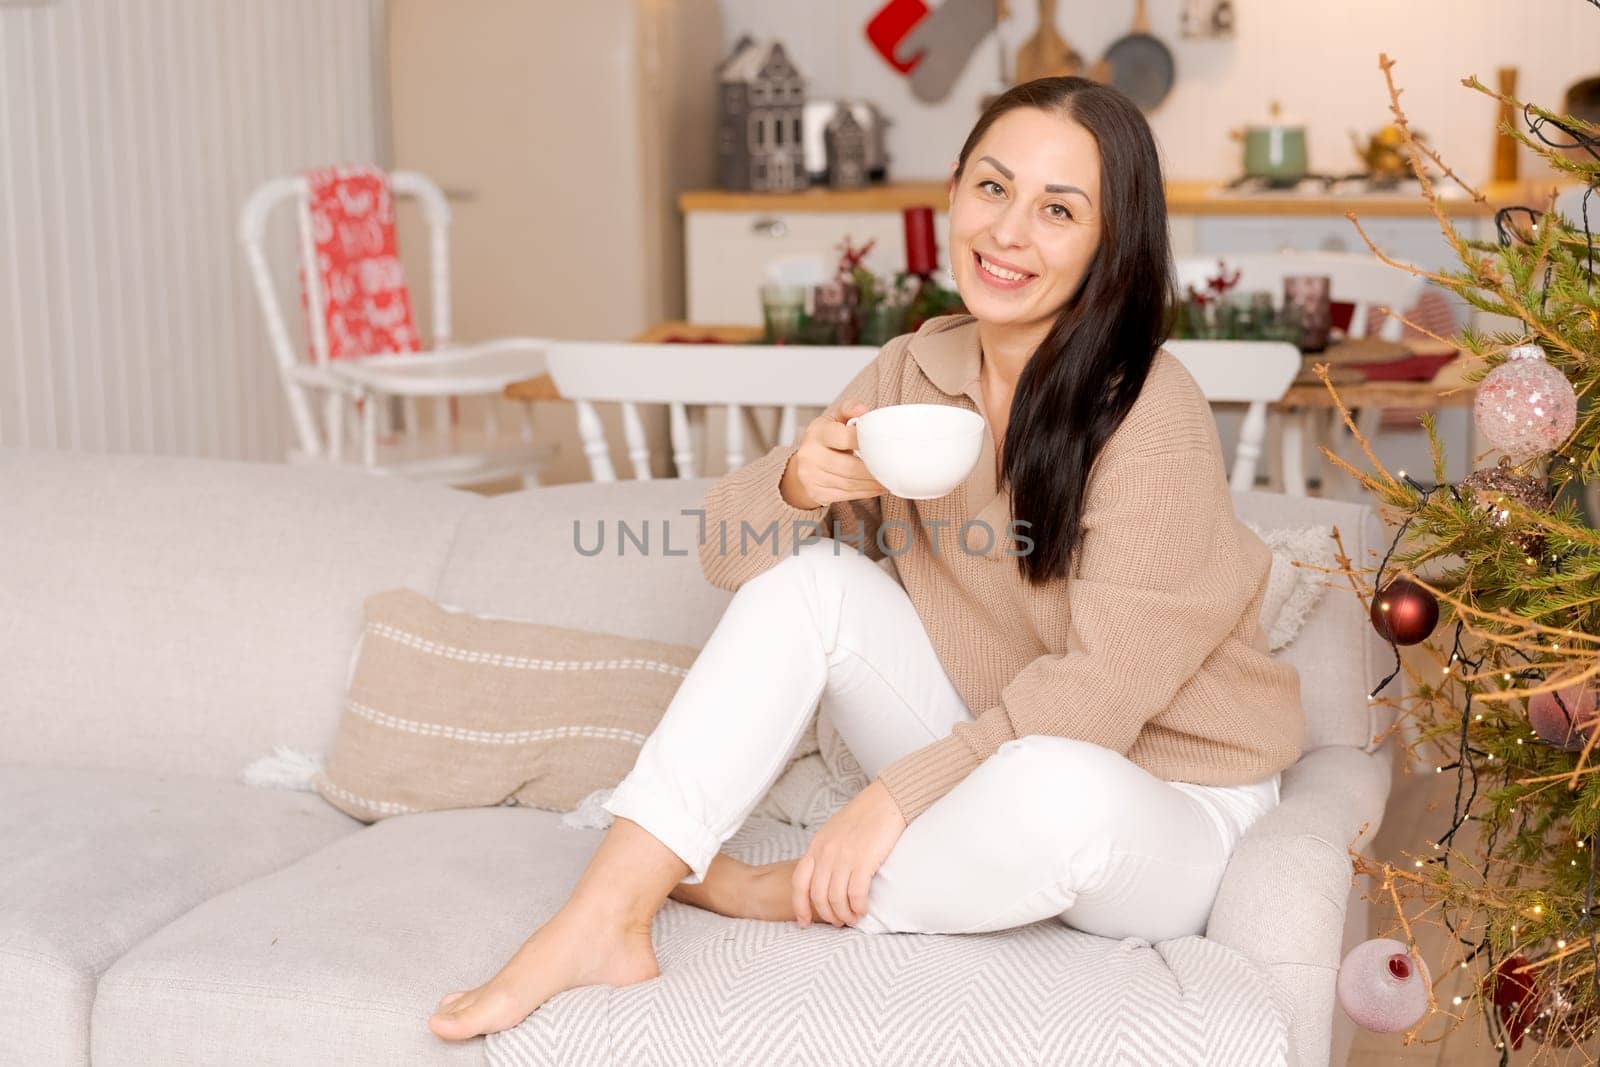 Concept festive Christmas atmosphere, lovely woman drinking tea or coffee sitting on a couch in a decorated kitchen wearing a sweater